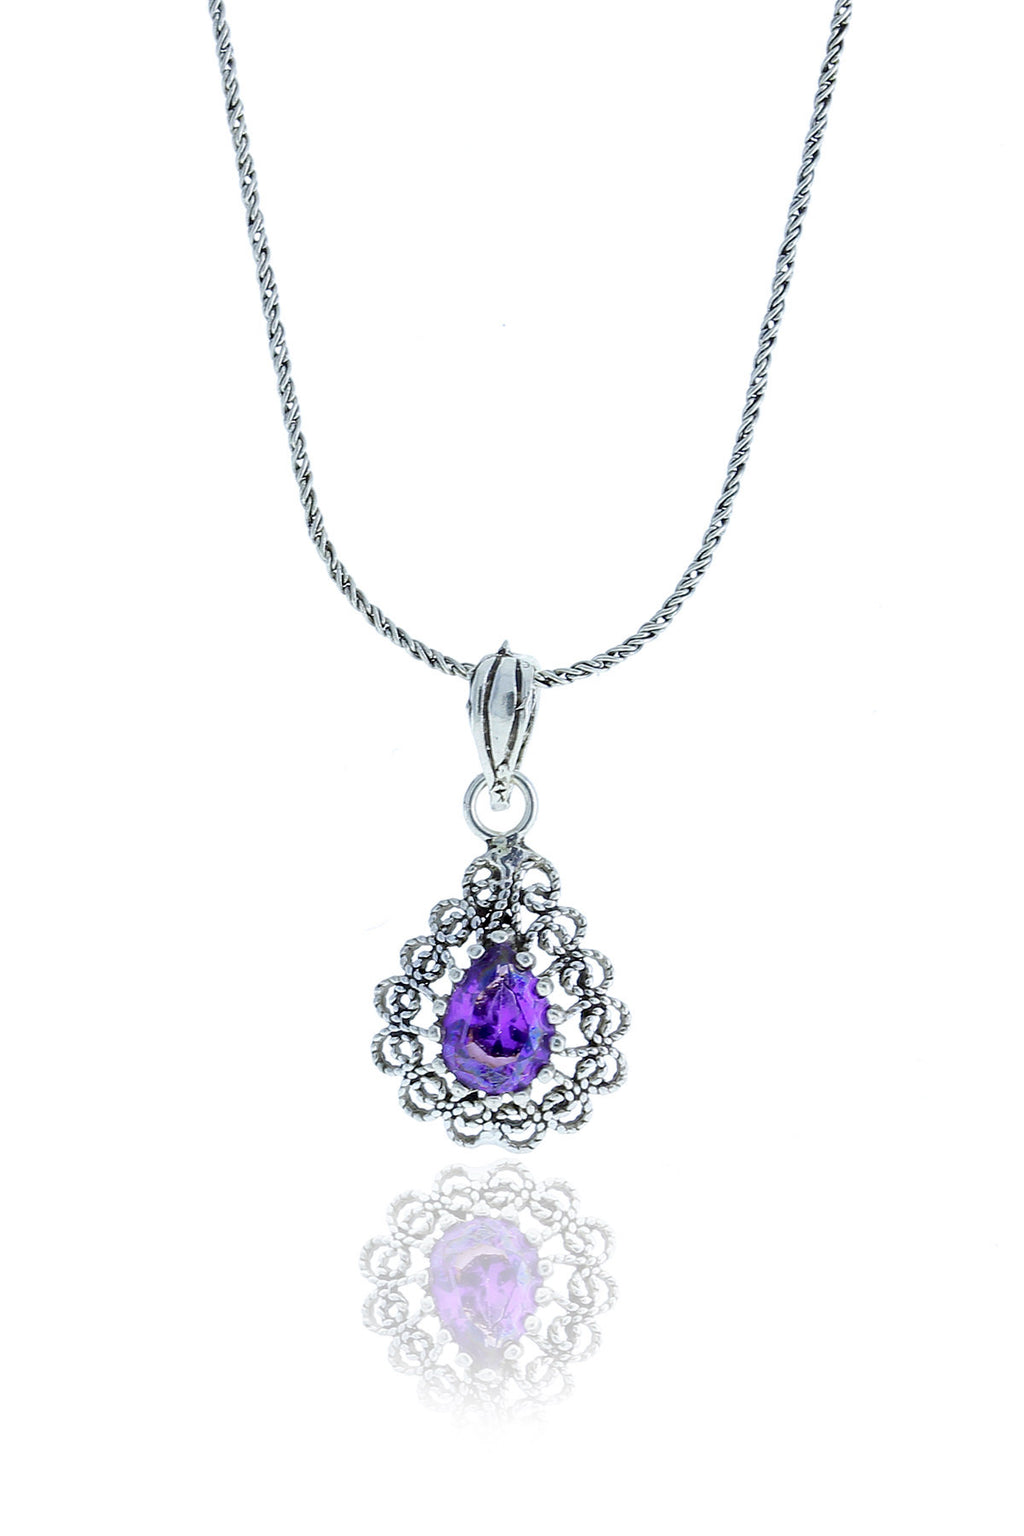 Drop Model Authentic Filigree Silver Necklace With Amethyst (NG201017532)